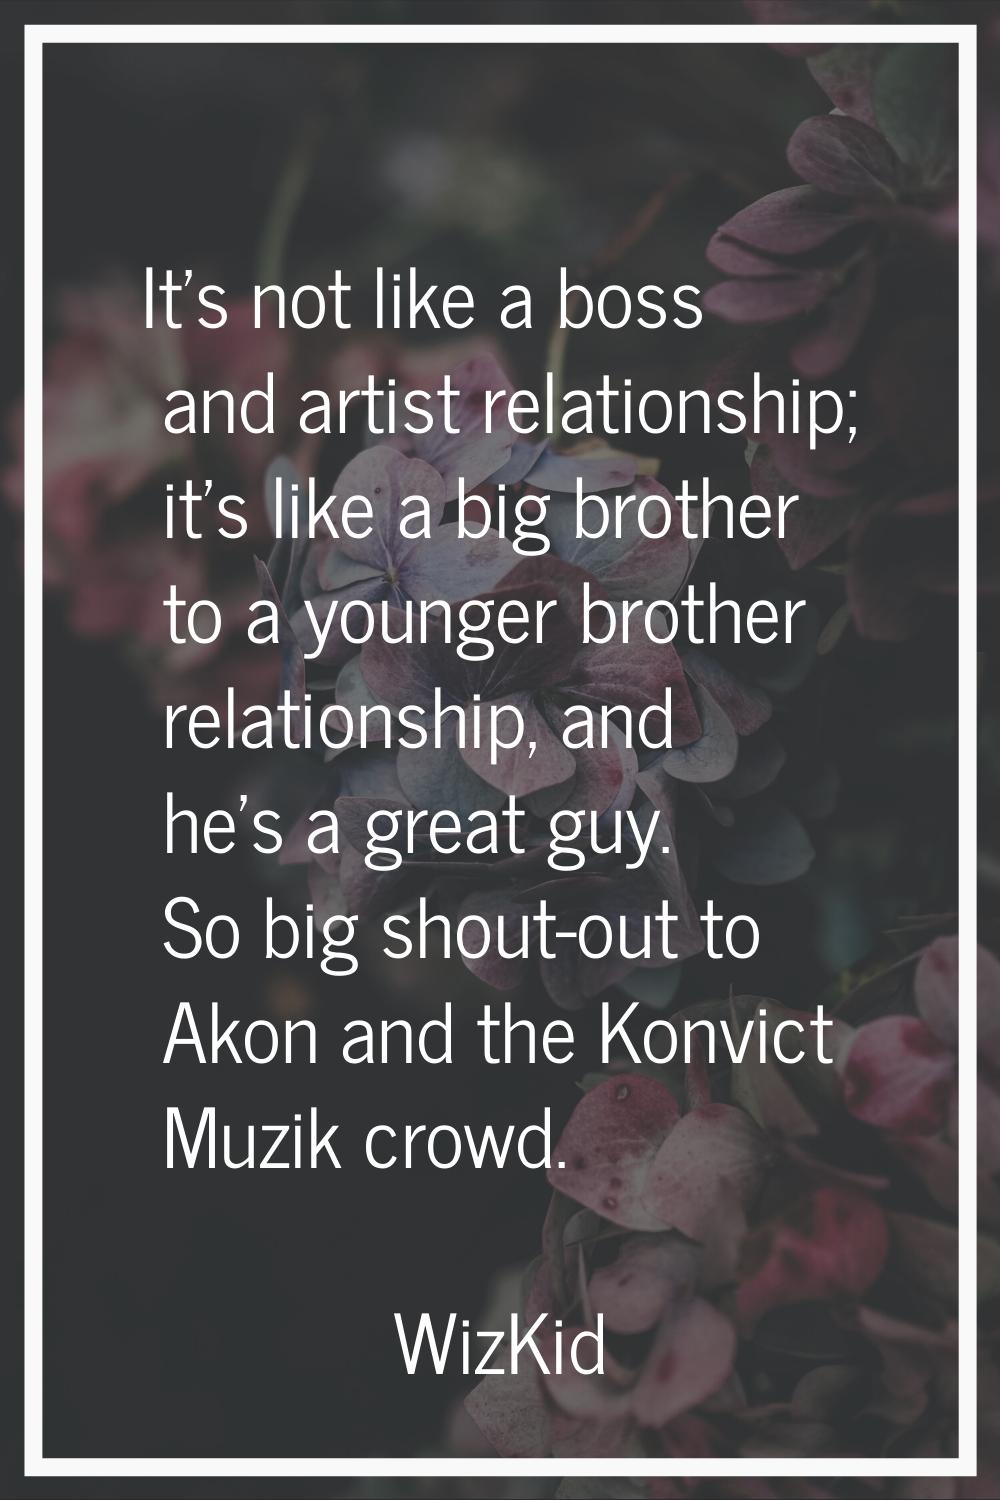 It's not like a boss and artist relationship; it's like a big brother to a younger brother relation